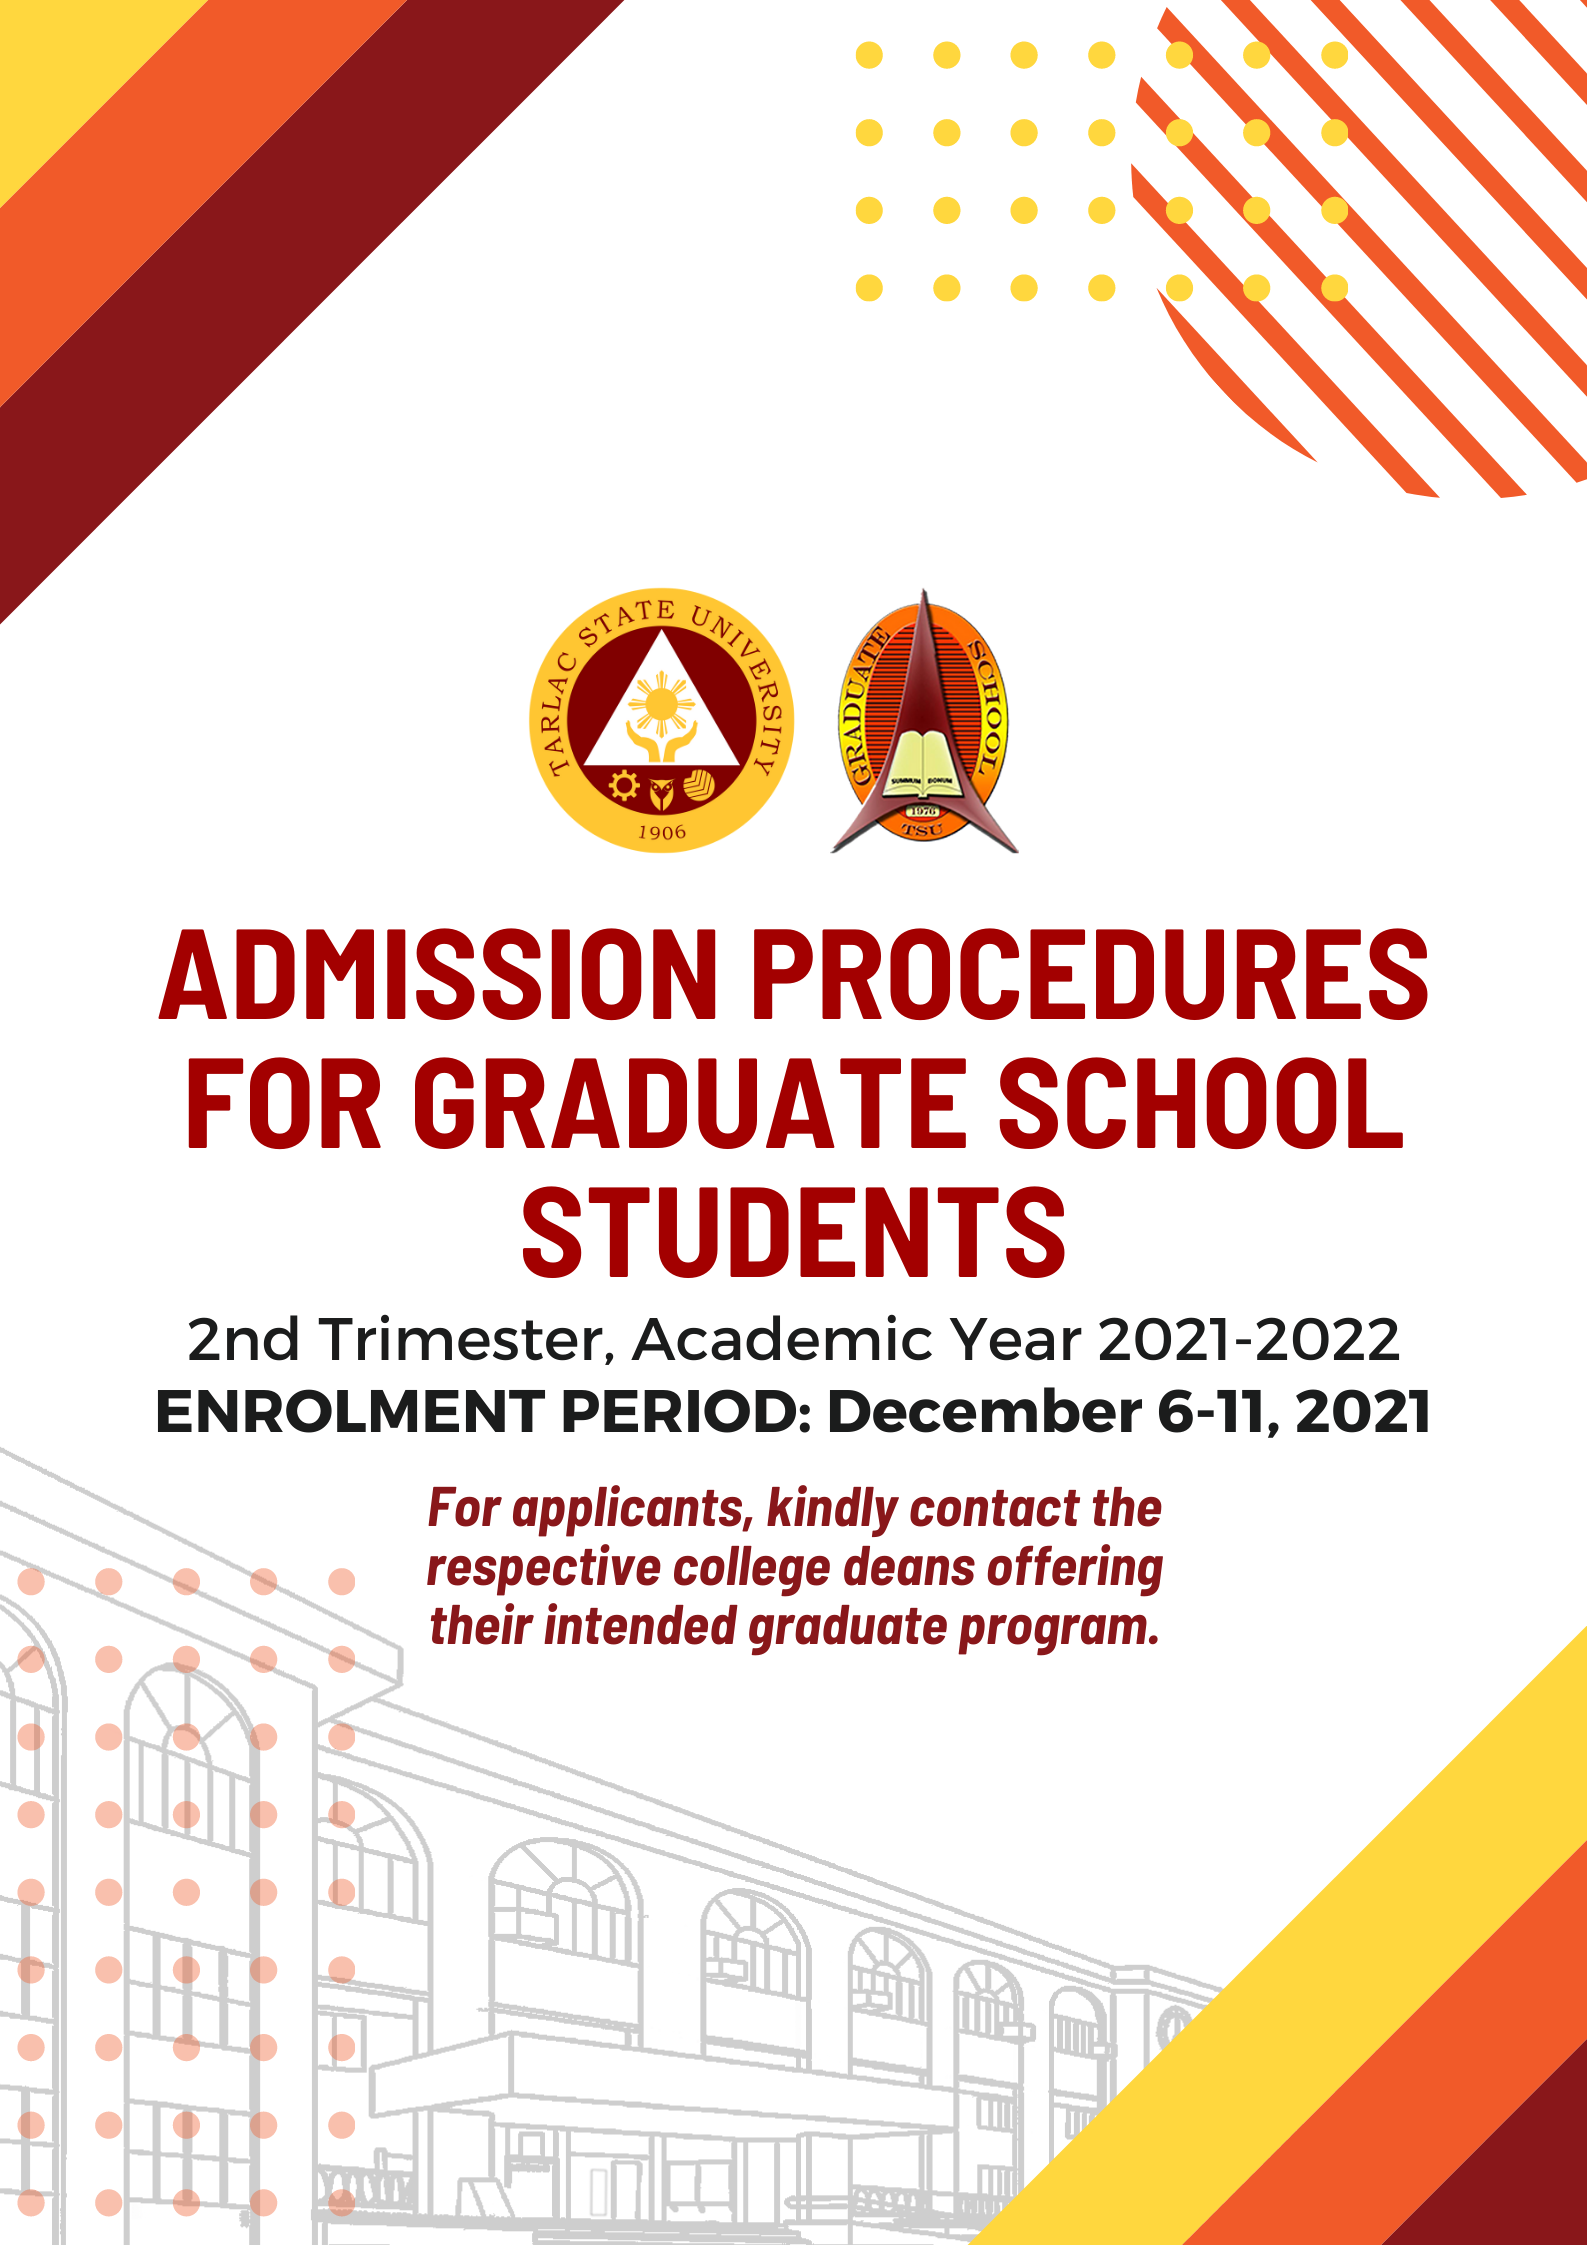 Tsu Academic Calendar 2022 Admission And Enrollment Procedures For Graduate School Students (2Nd  Trimester, A.y. 2021-2022) - Tarlac State University